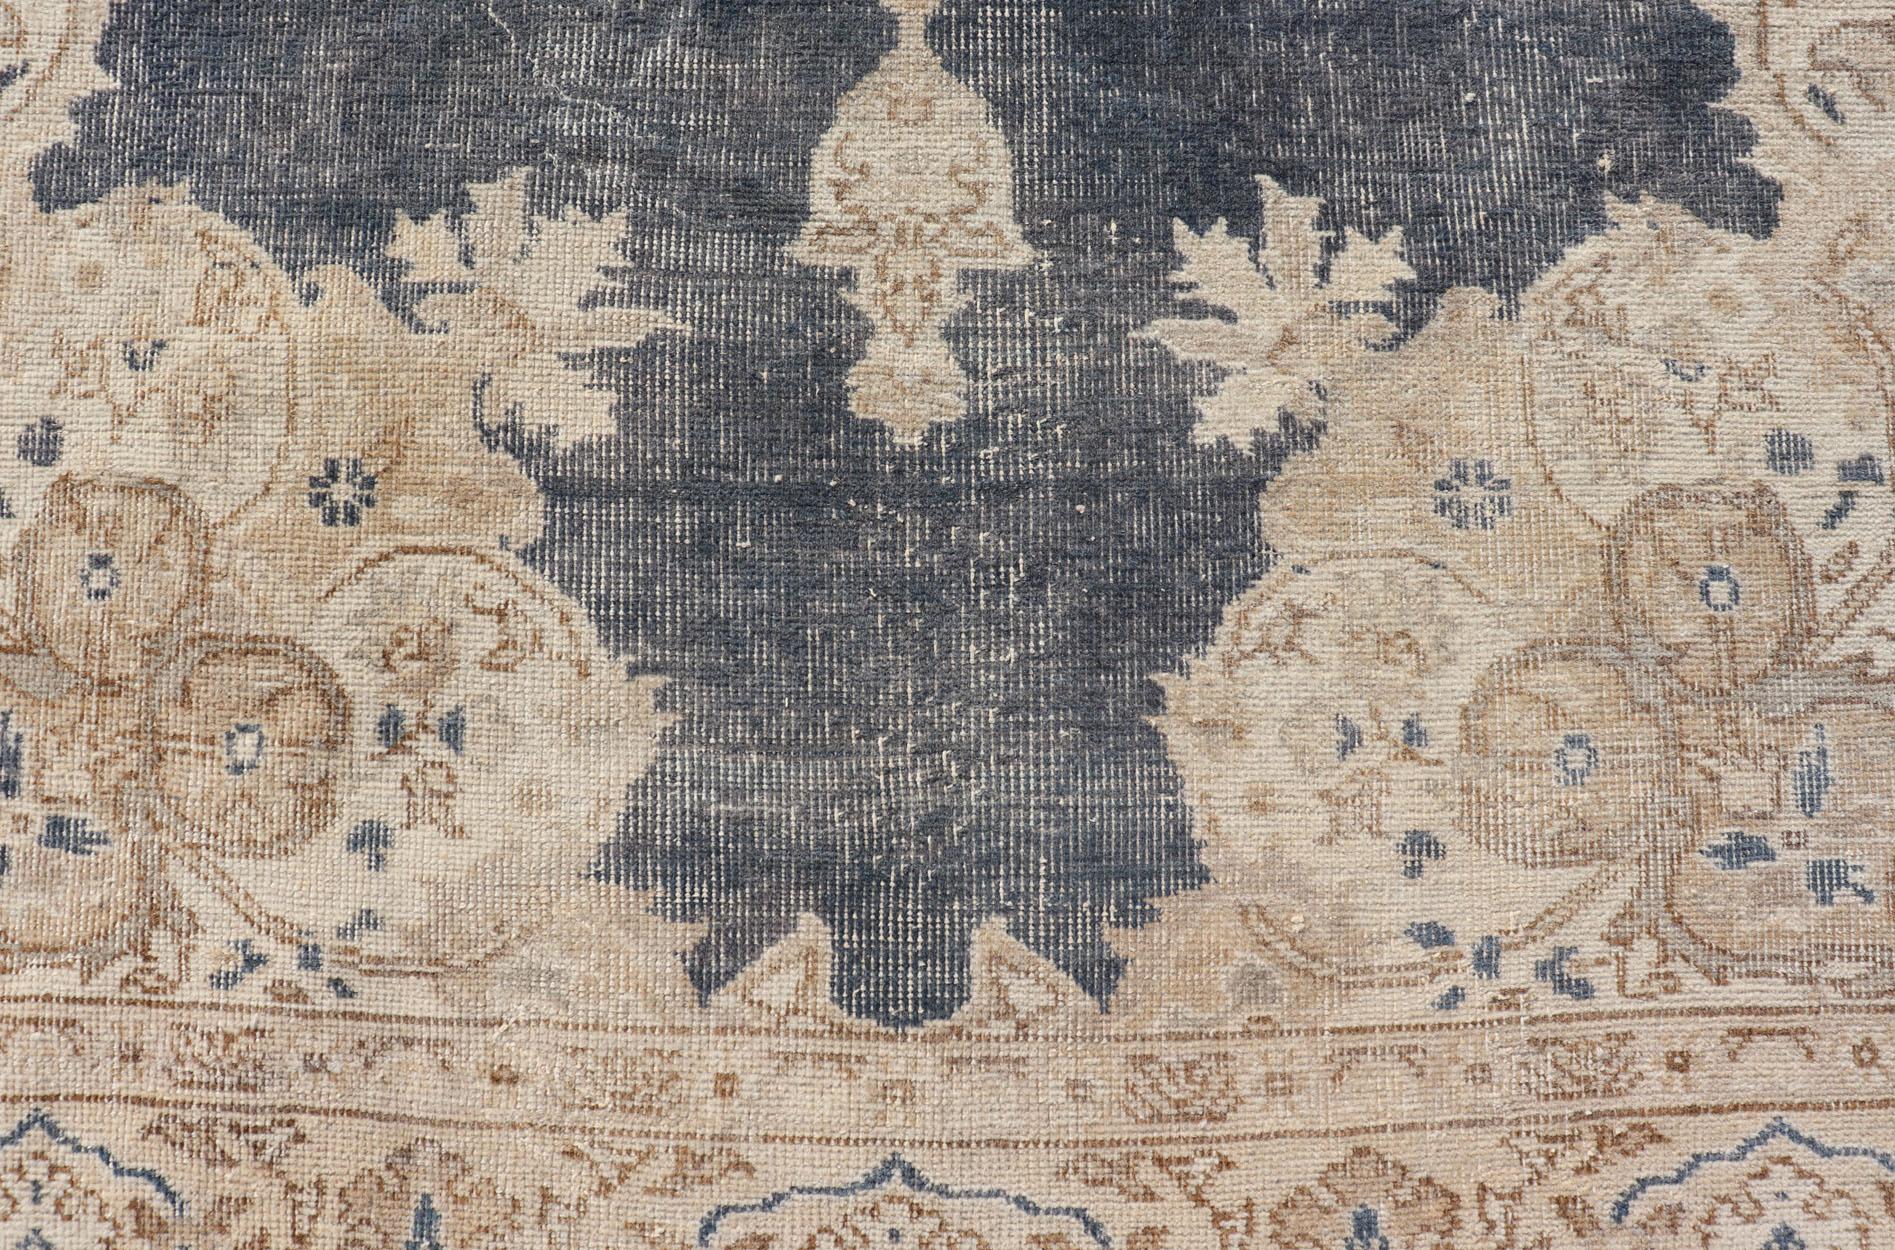 Measures: 5'2 x 8'5 
Distressed Turkish Carpet with Floral Design in Blue, Tan, Taupe, and Cream. Keivan Woven Arts /  EN-14975 rug/ Turkish / Vintage Mid-20th Century

This vintage Turkish carpet has been neutralized to create faded pigments with a